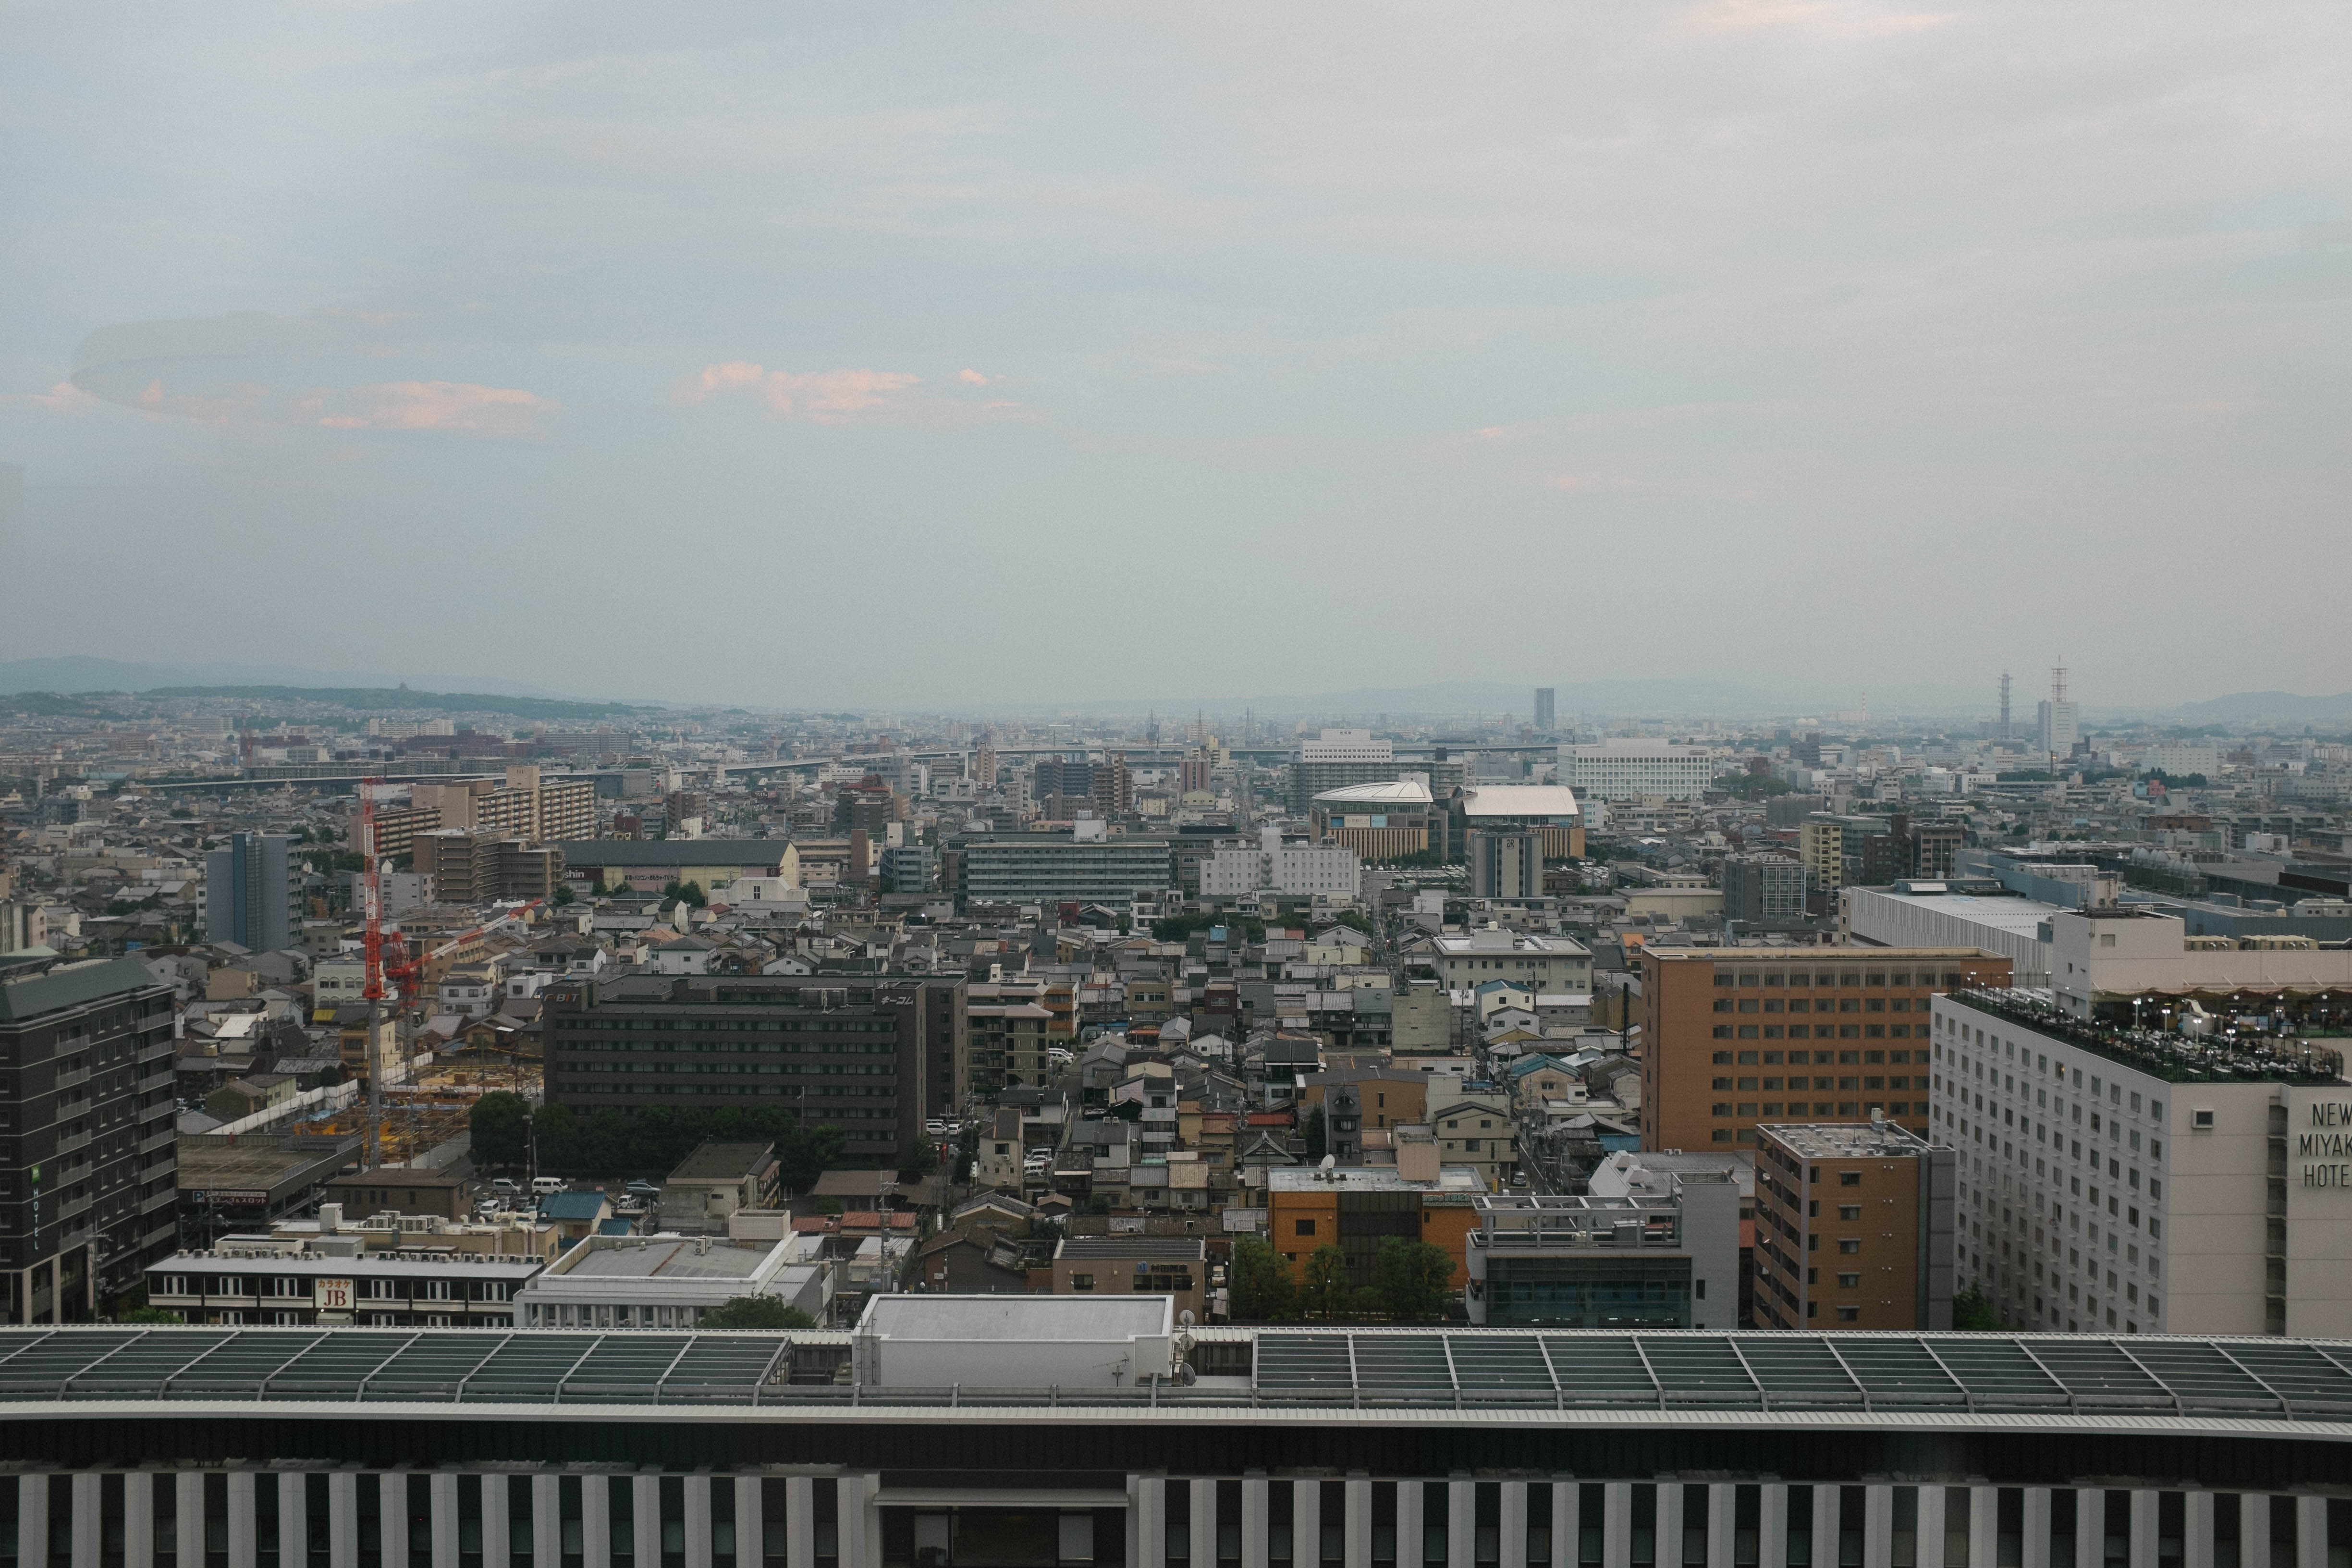 Kyoto from the top of the train station.